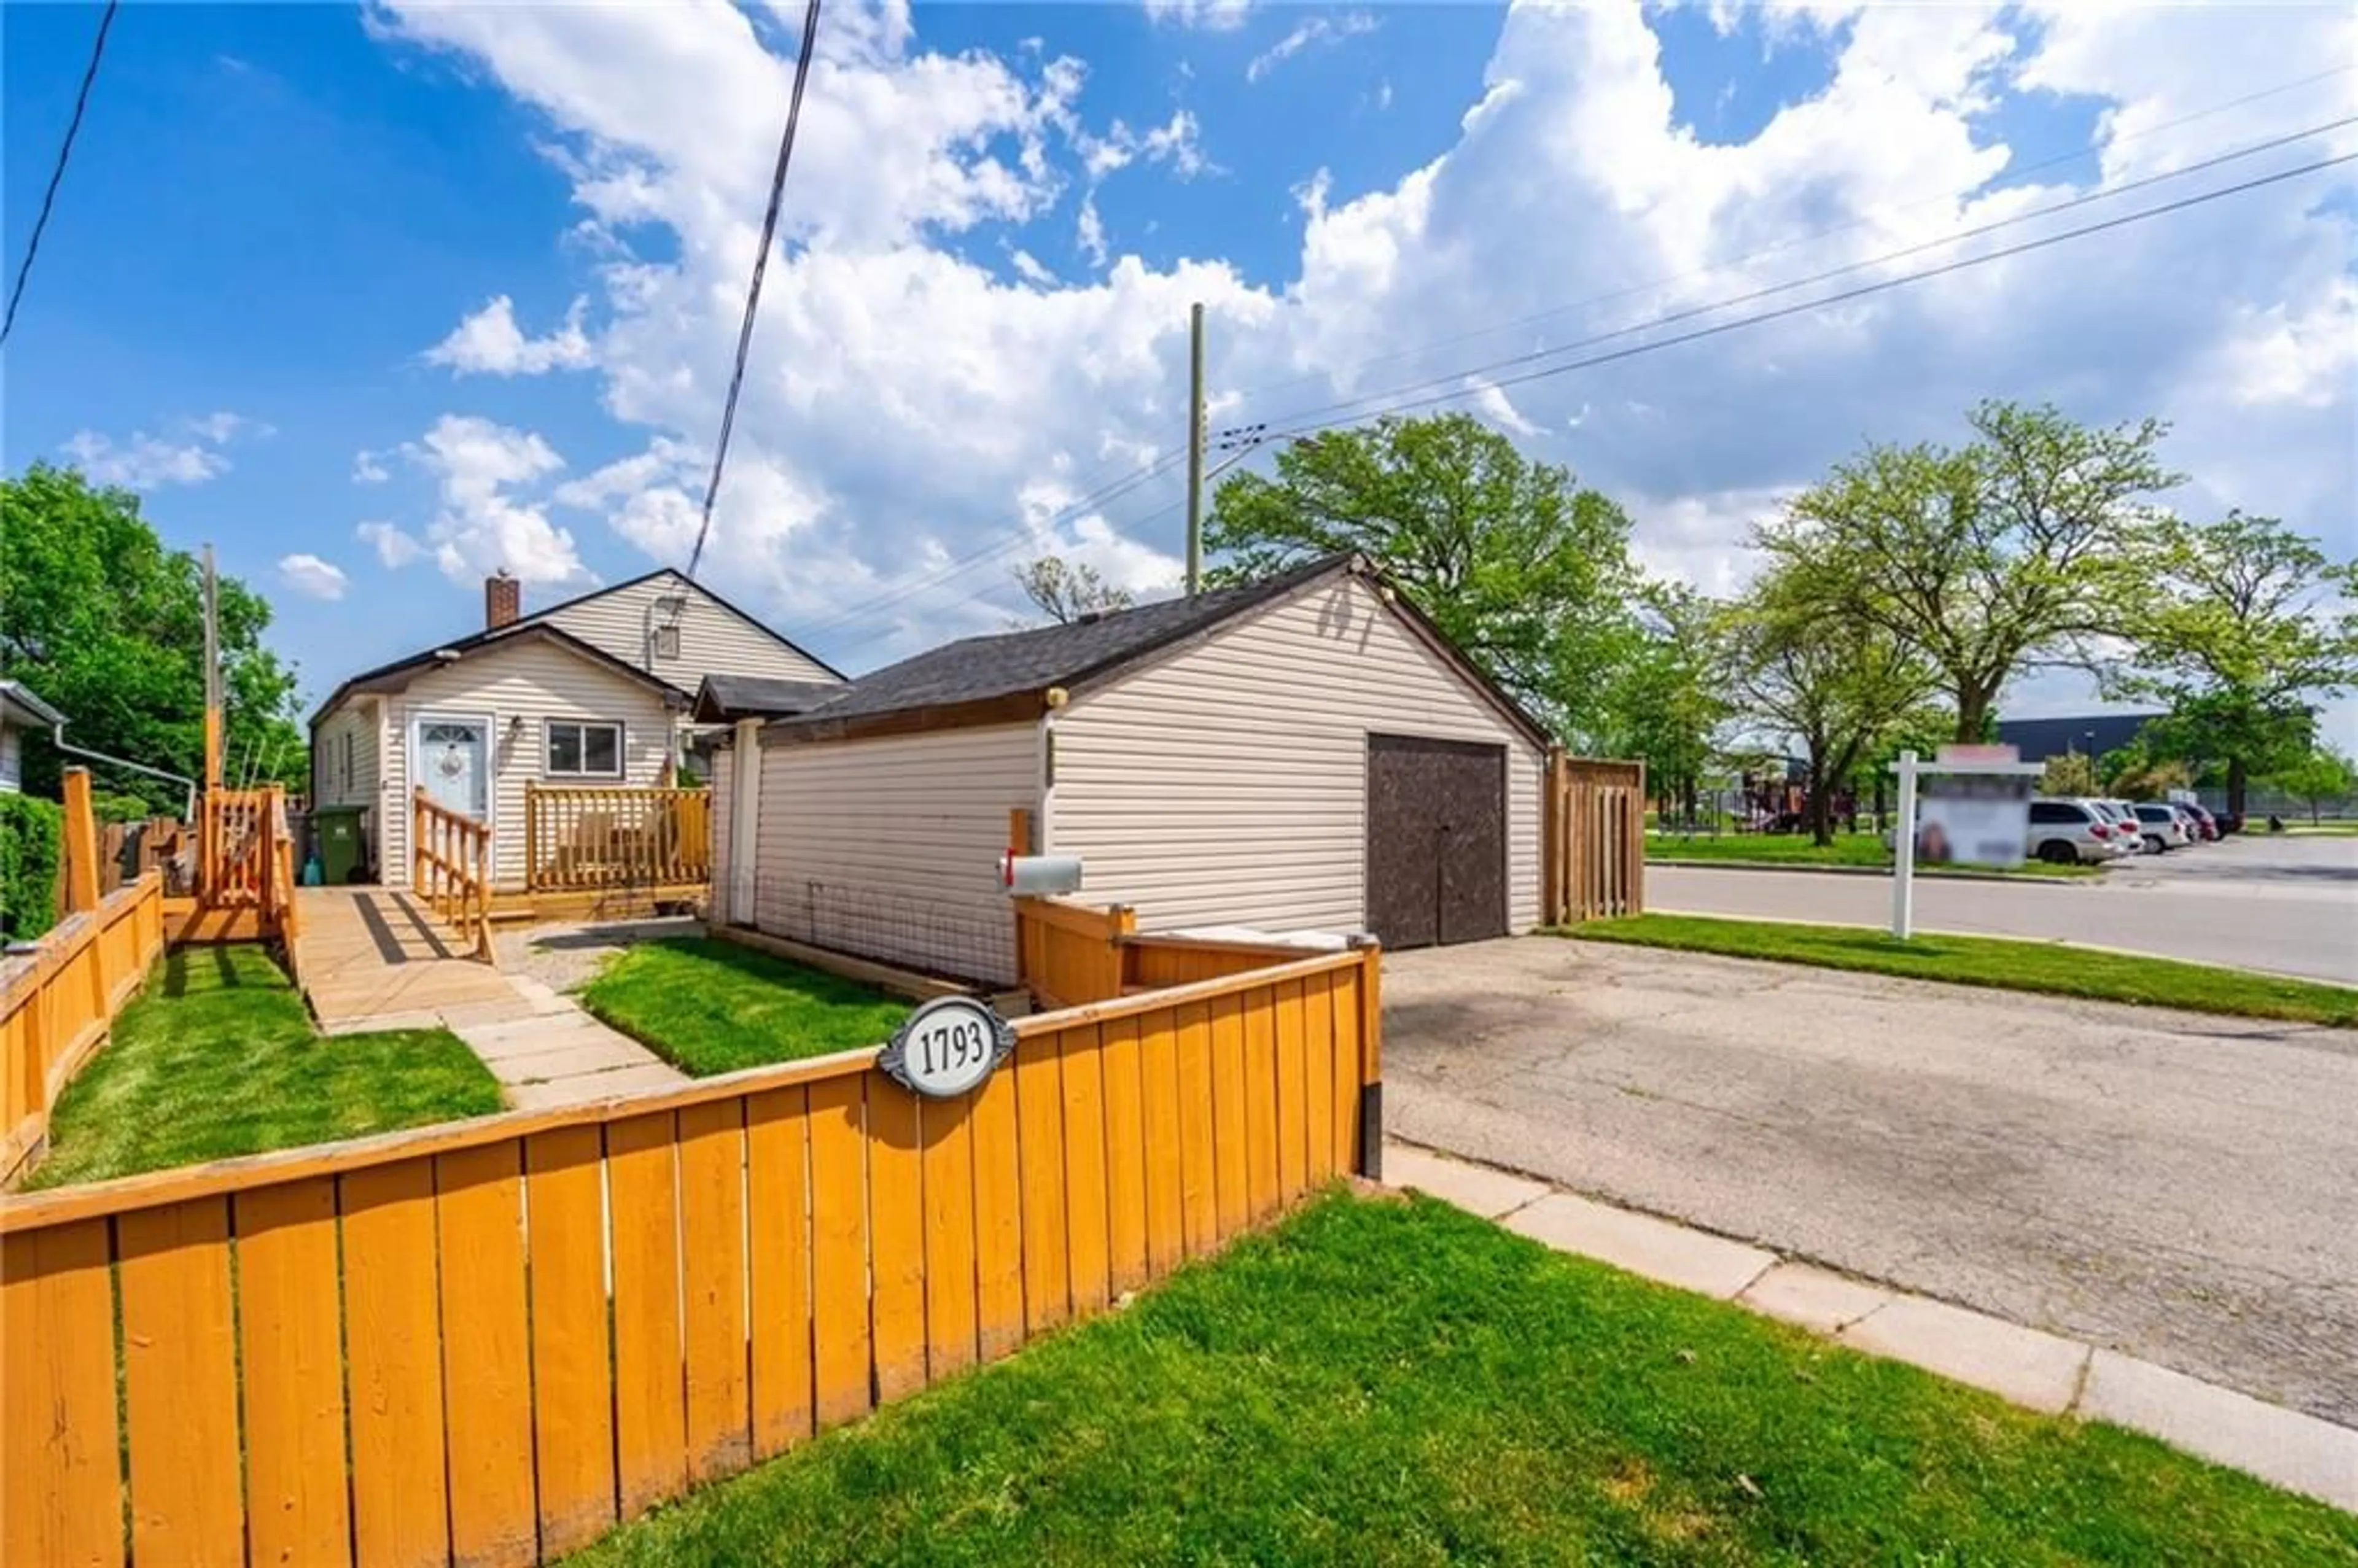 Frontside or backside of a home for 1793 Main St, Hamilton Ontario L8H 1E5